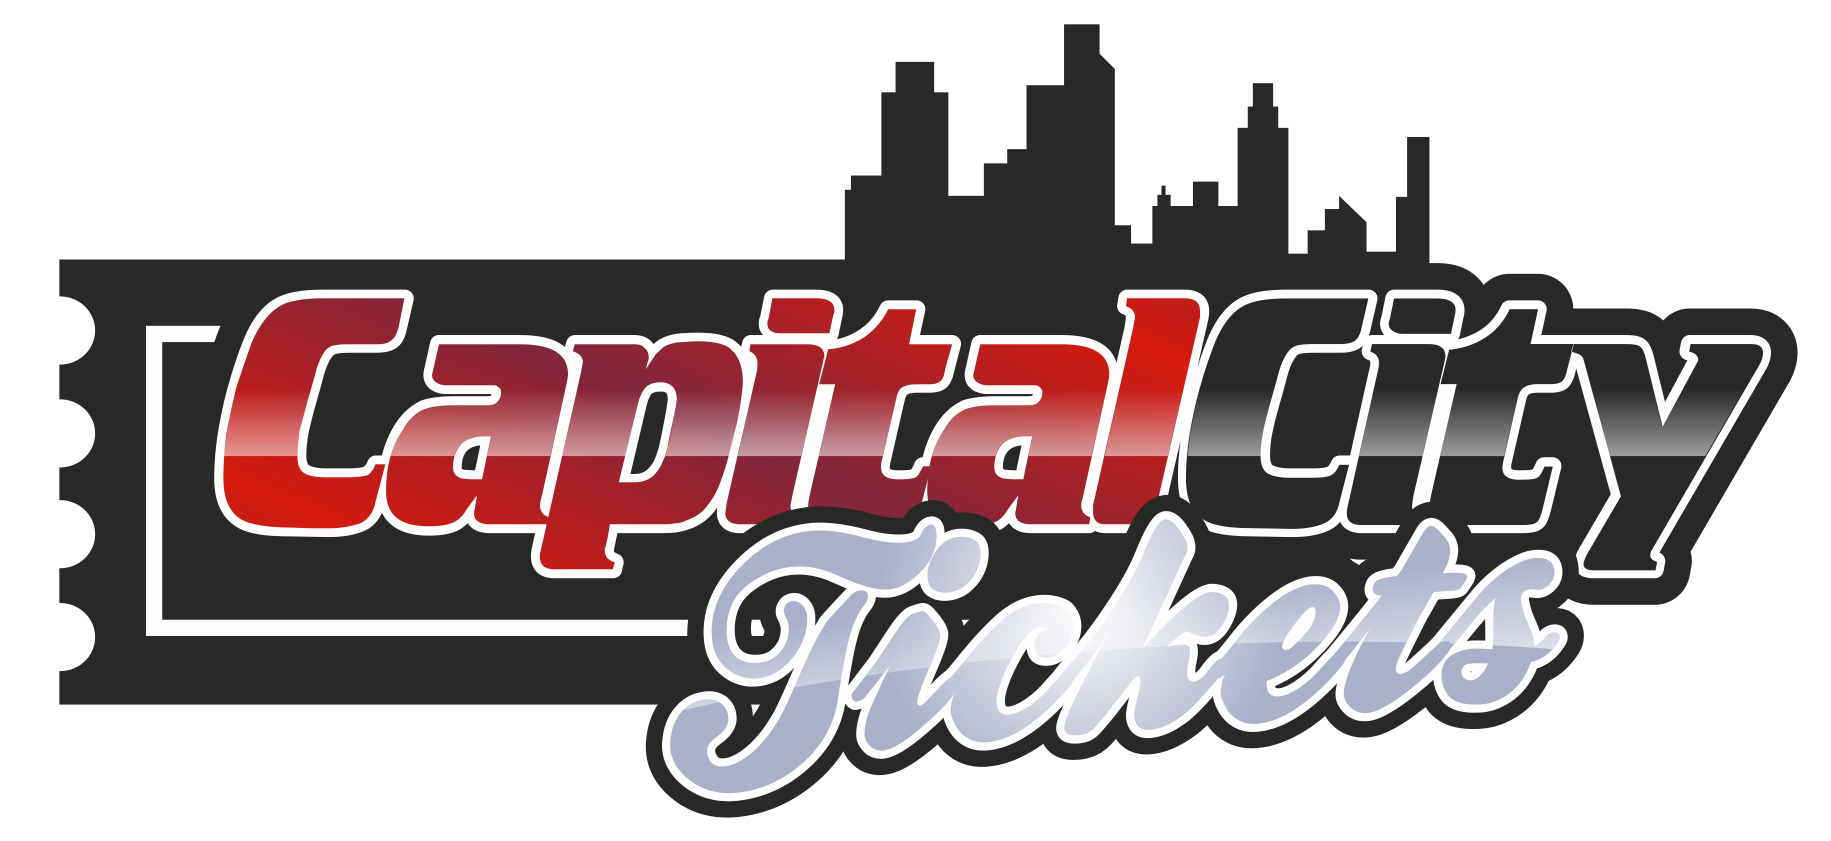 Cheap 2021-22 Carolina Hurricanes Hockey Tickets for Center Ice, Upper, and Club Seating Online with Promo Code at Capital City Tickets - See Schedules, Seating Charts, and Game Dates